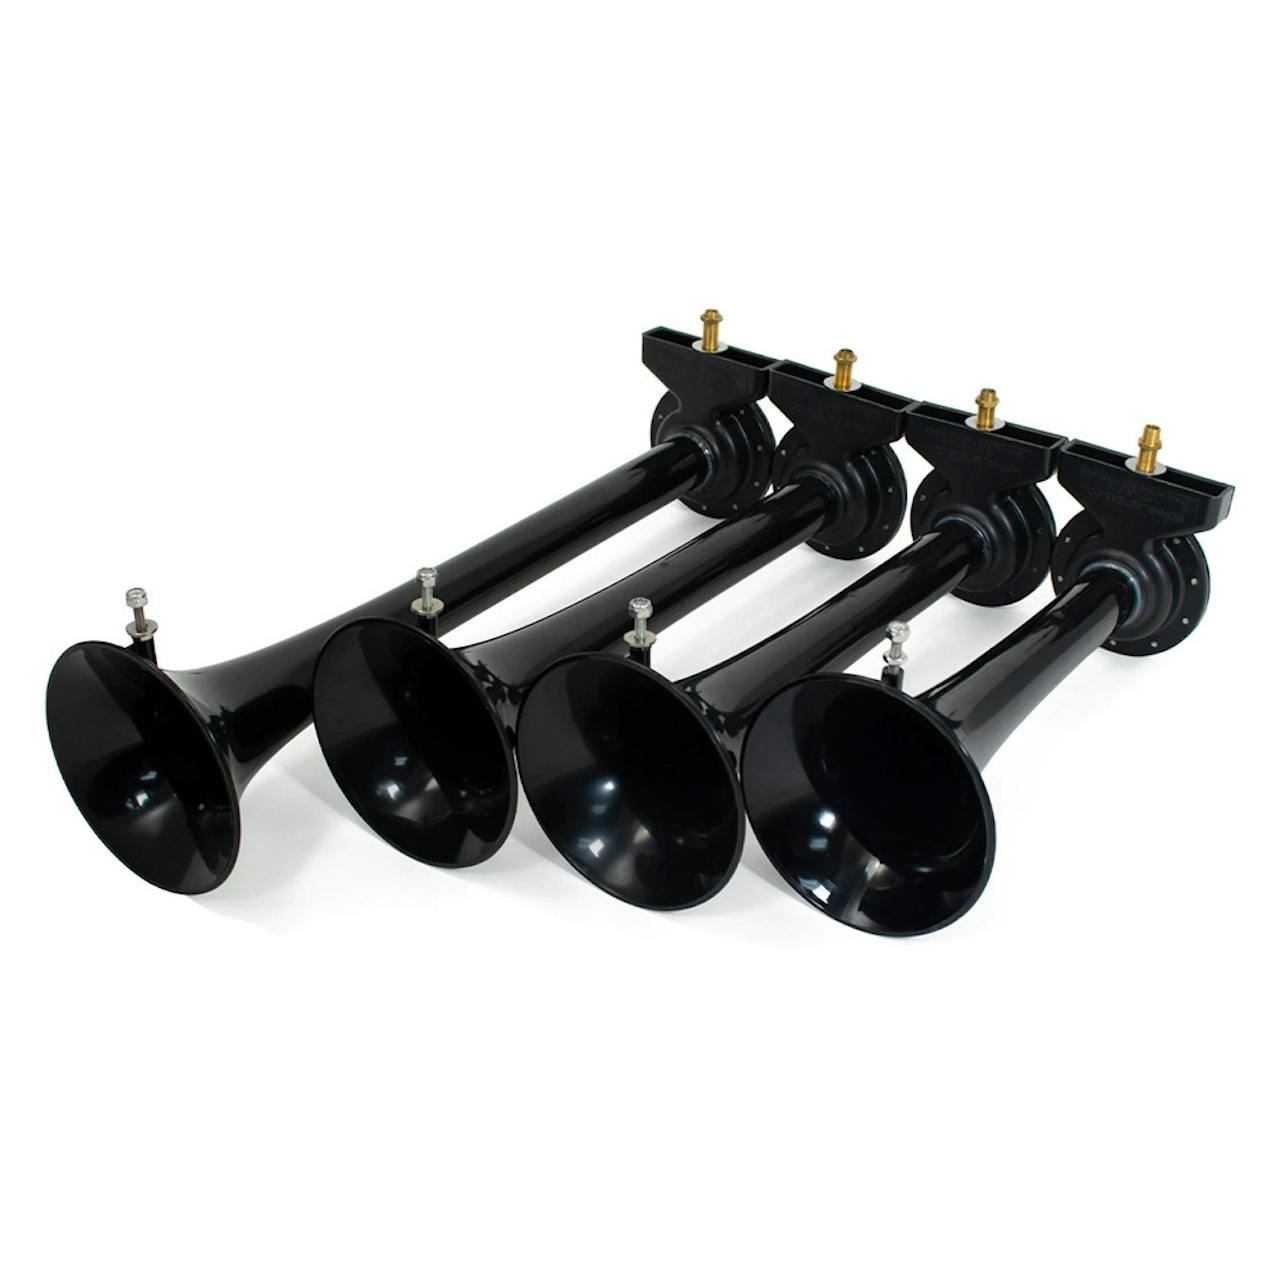 train horn kit, train horn kit Suppliers and Manufacturers at